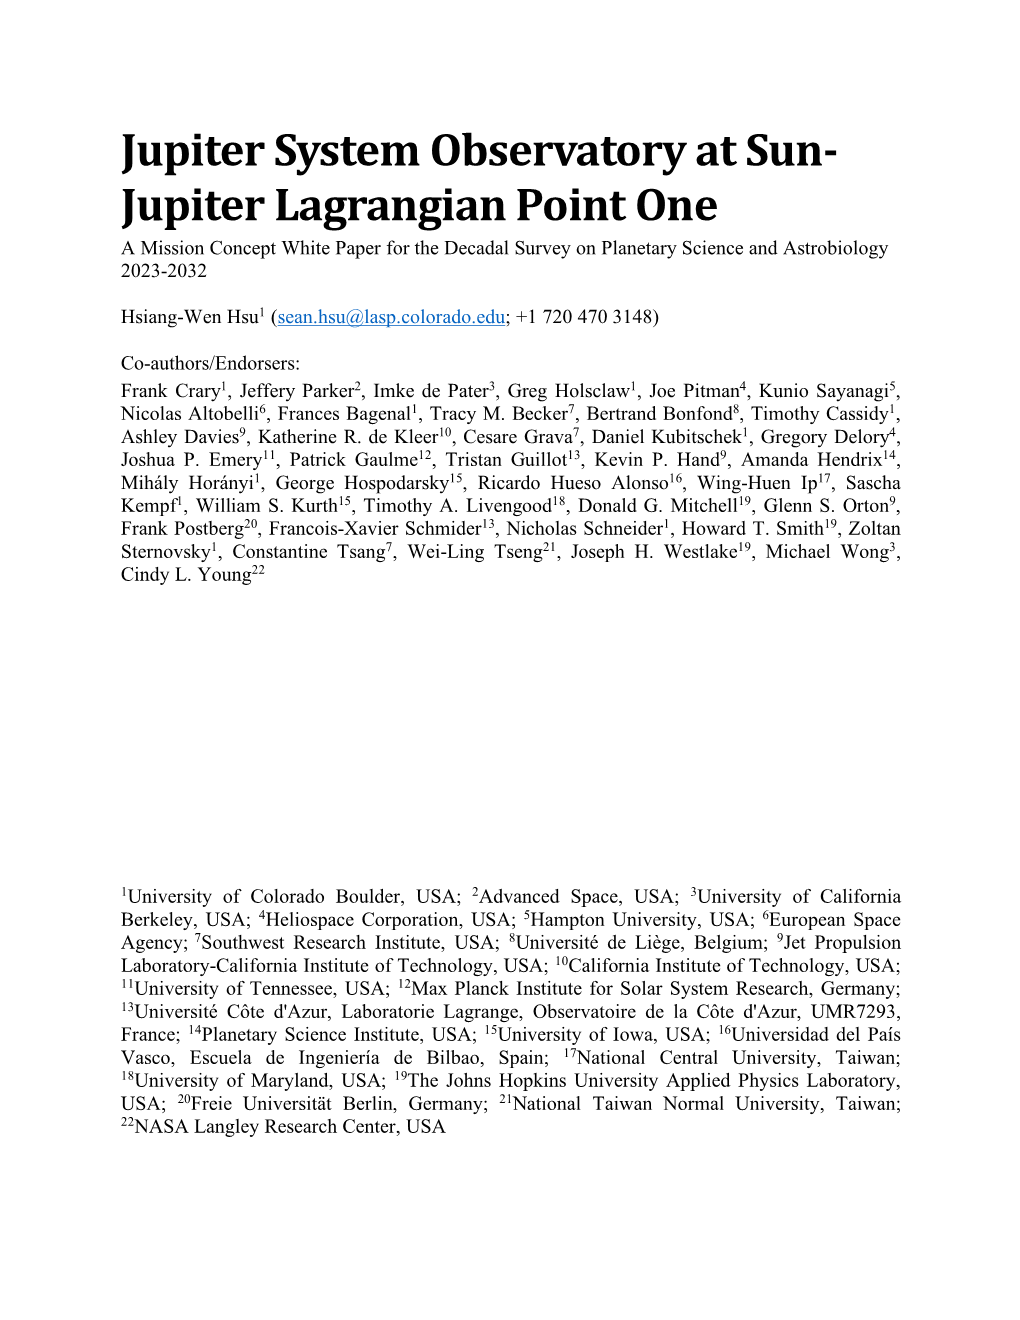 Jupiter System Observatory at Sun- Jupiter Lagrangian Point One a Mission Concept White Paper for the Decadal Survey on Planetary Science and Astrobiology 2023-2032